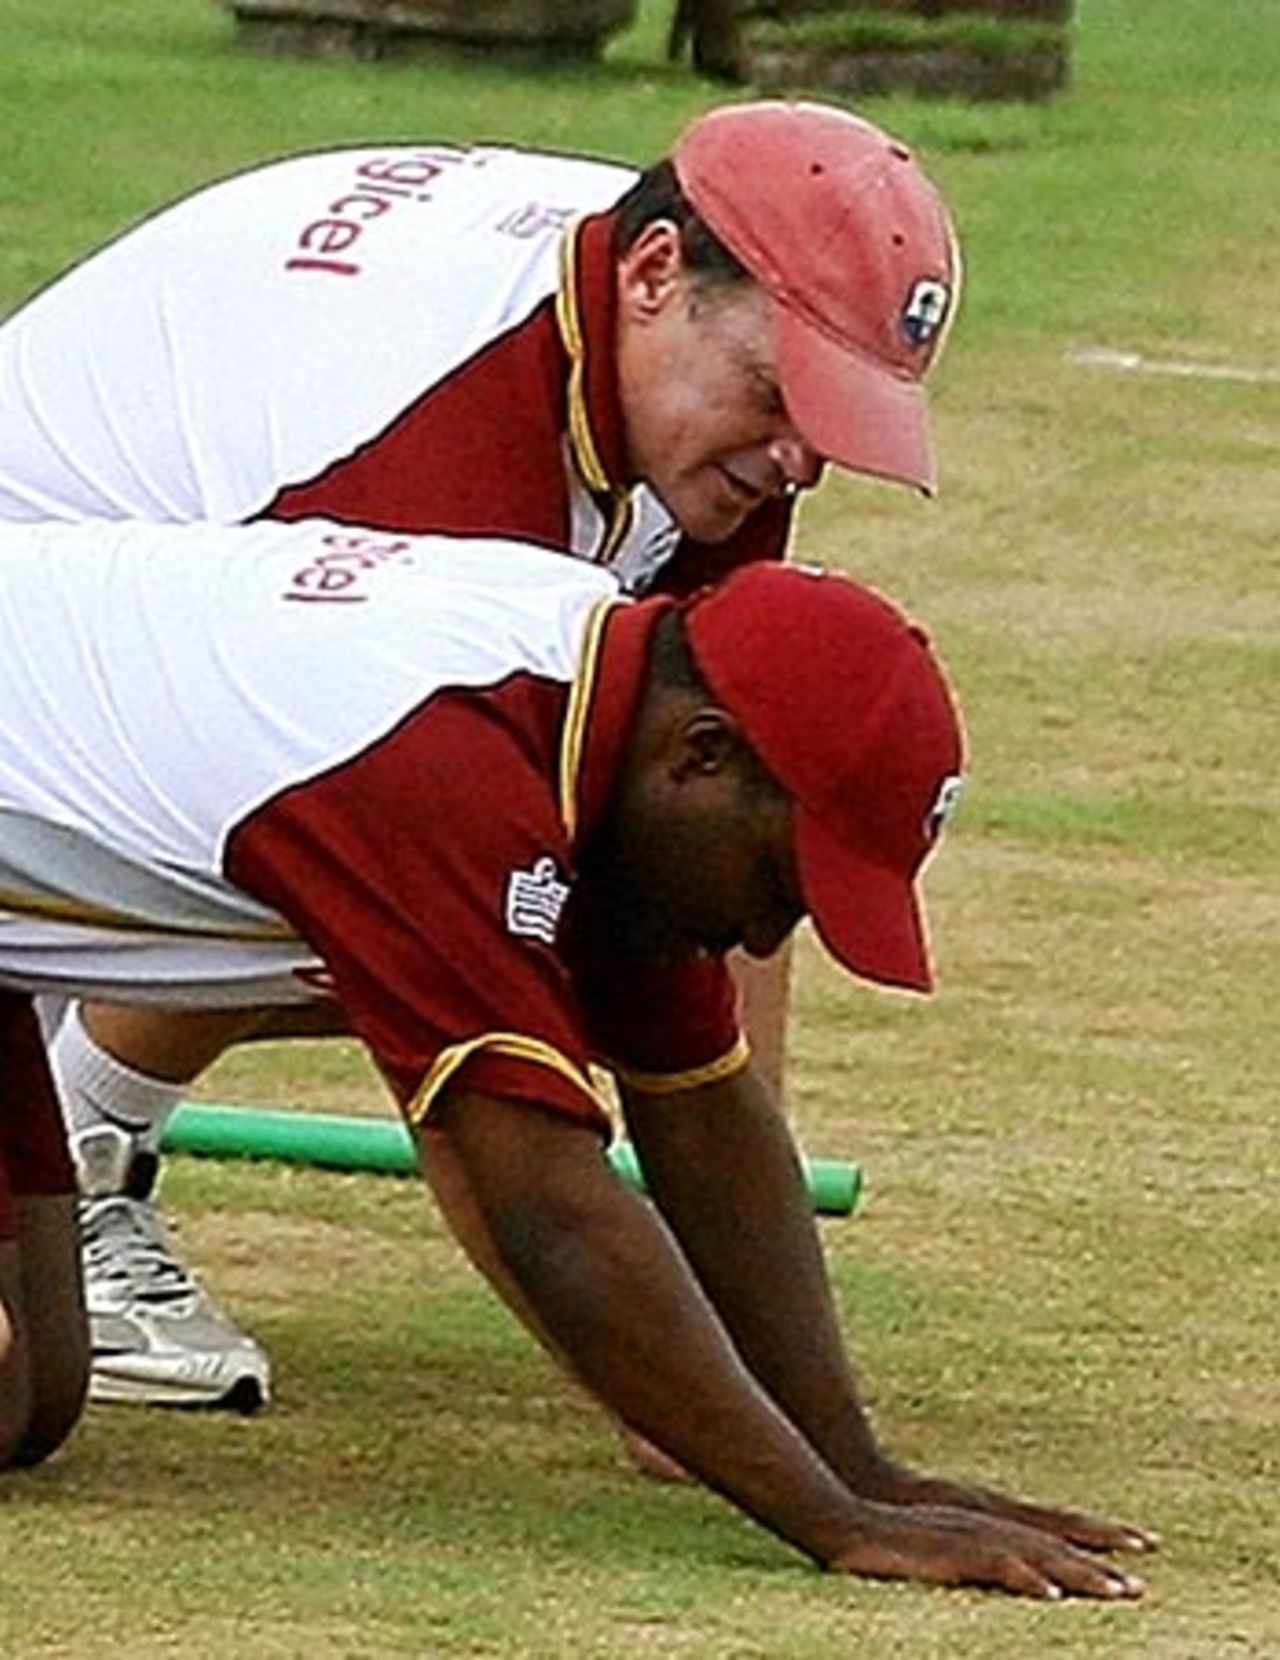 Brian Lara and Bennett King take a close look at the pitch, St Lucia, June 9, 2006